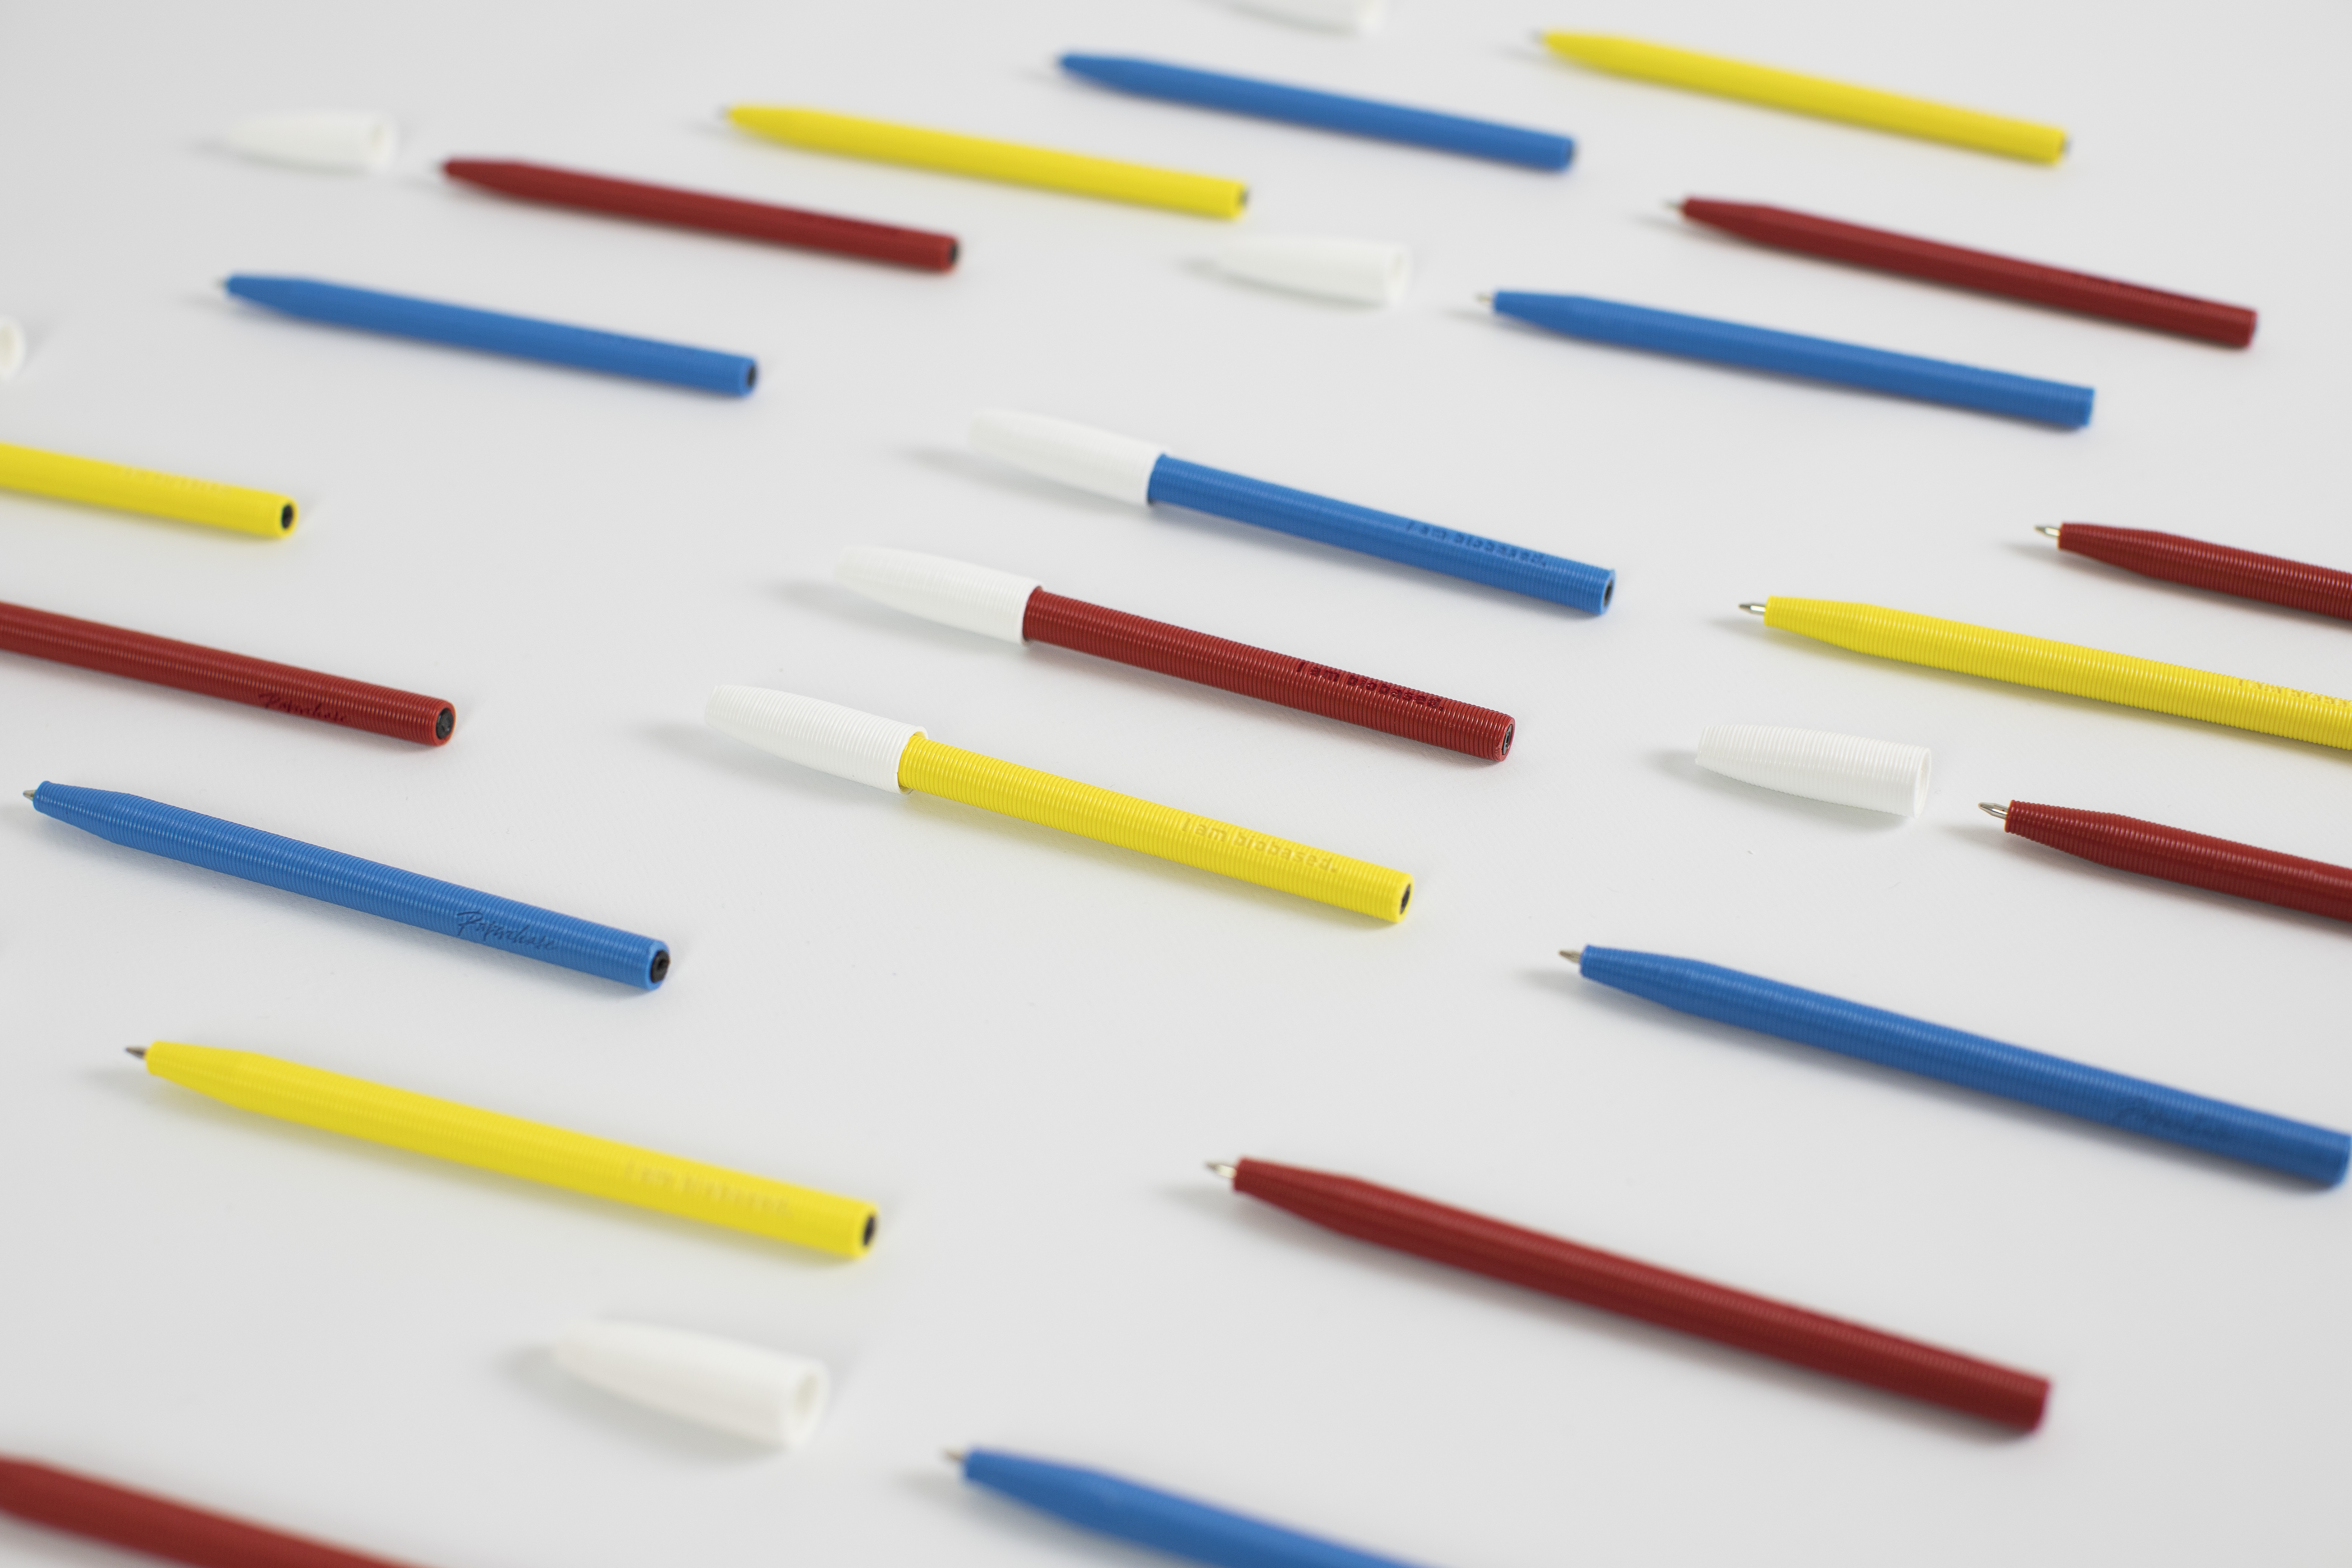 3D printed biodegradable pens for Paperchase. Photo via Batch.Works.